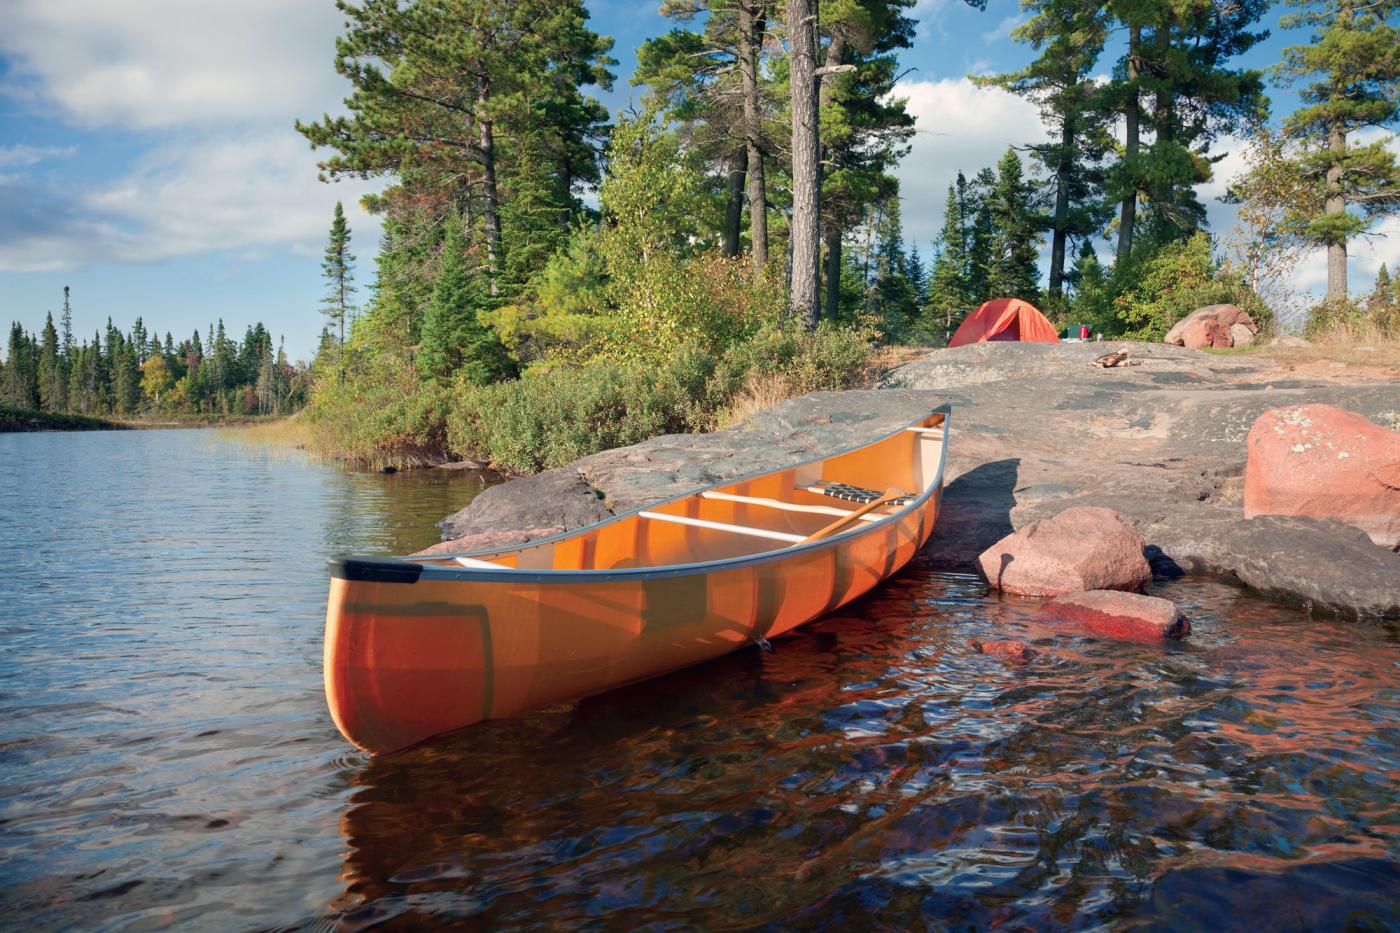 Canoe on the rocky shore of a campsite